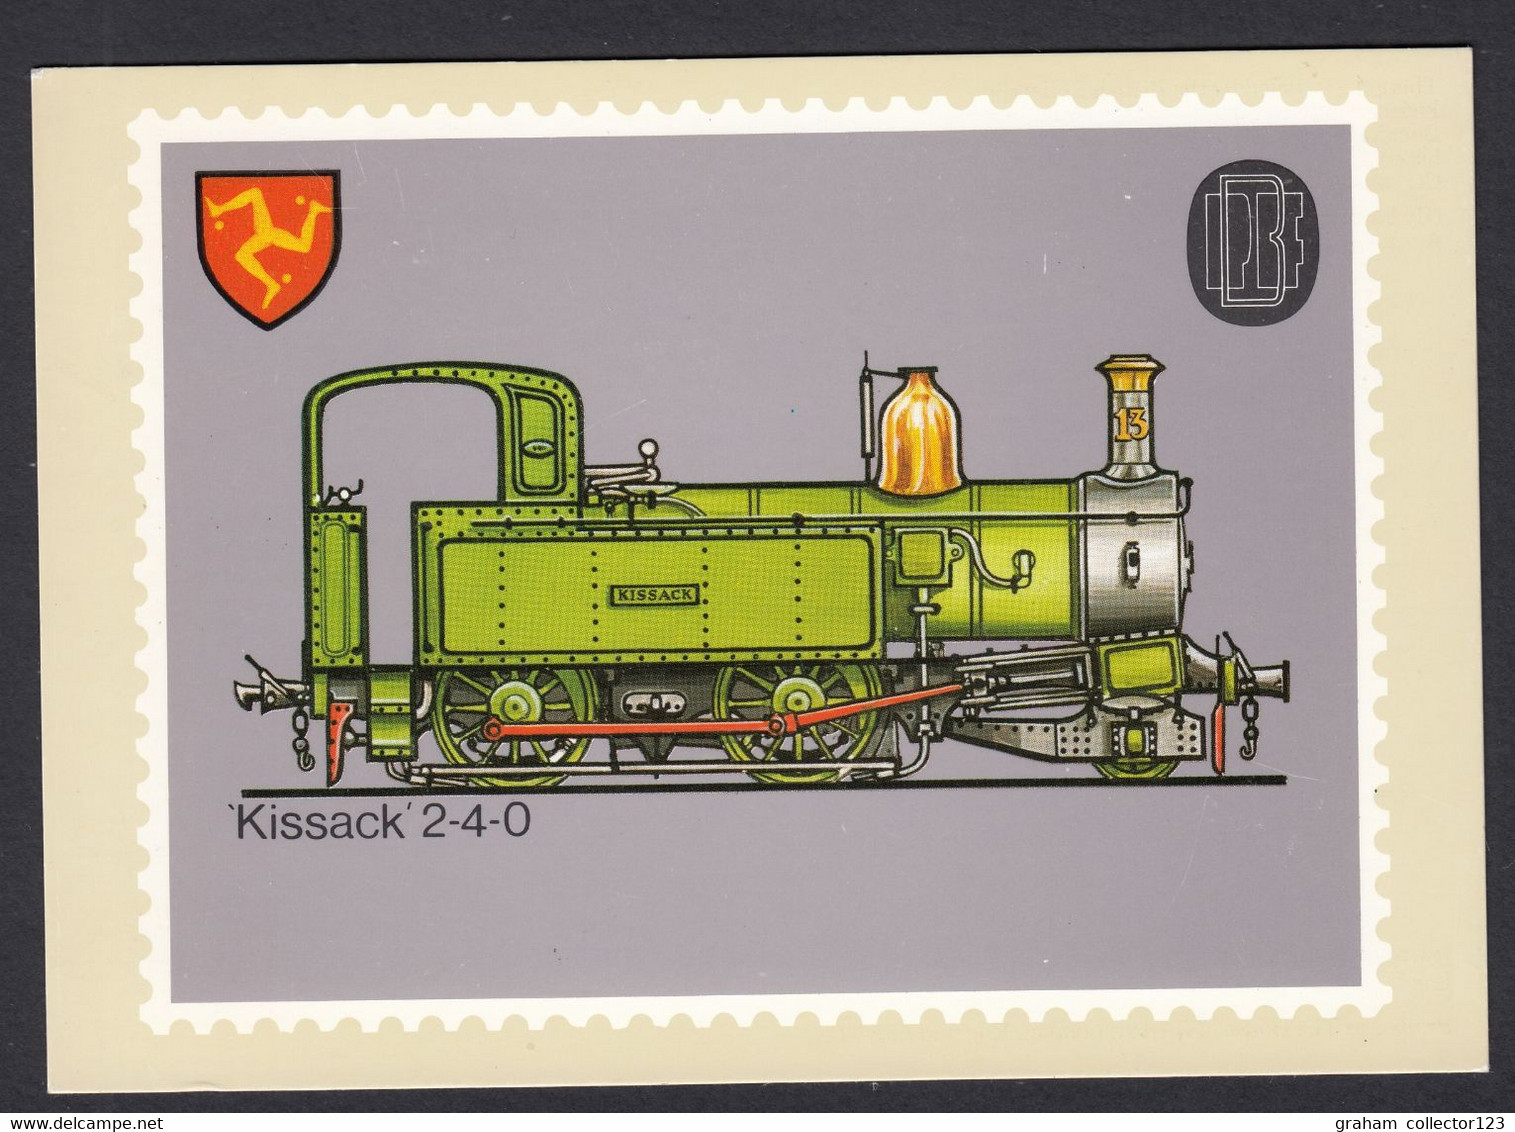 1984 Postcard Isle Of Man Steam Railway Displaying Two IOM Stamps With British Philatelic 66th Congress SHS - Non Classés